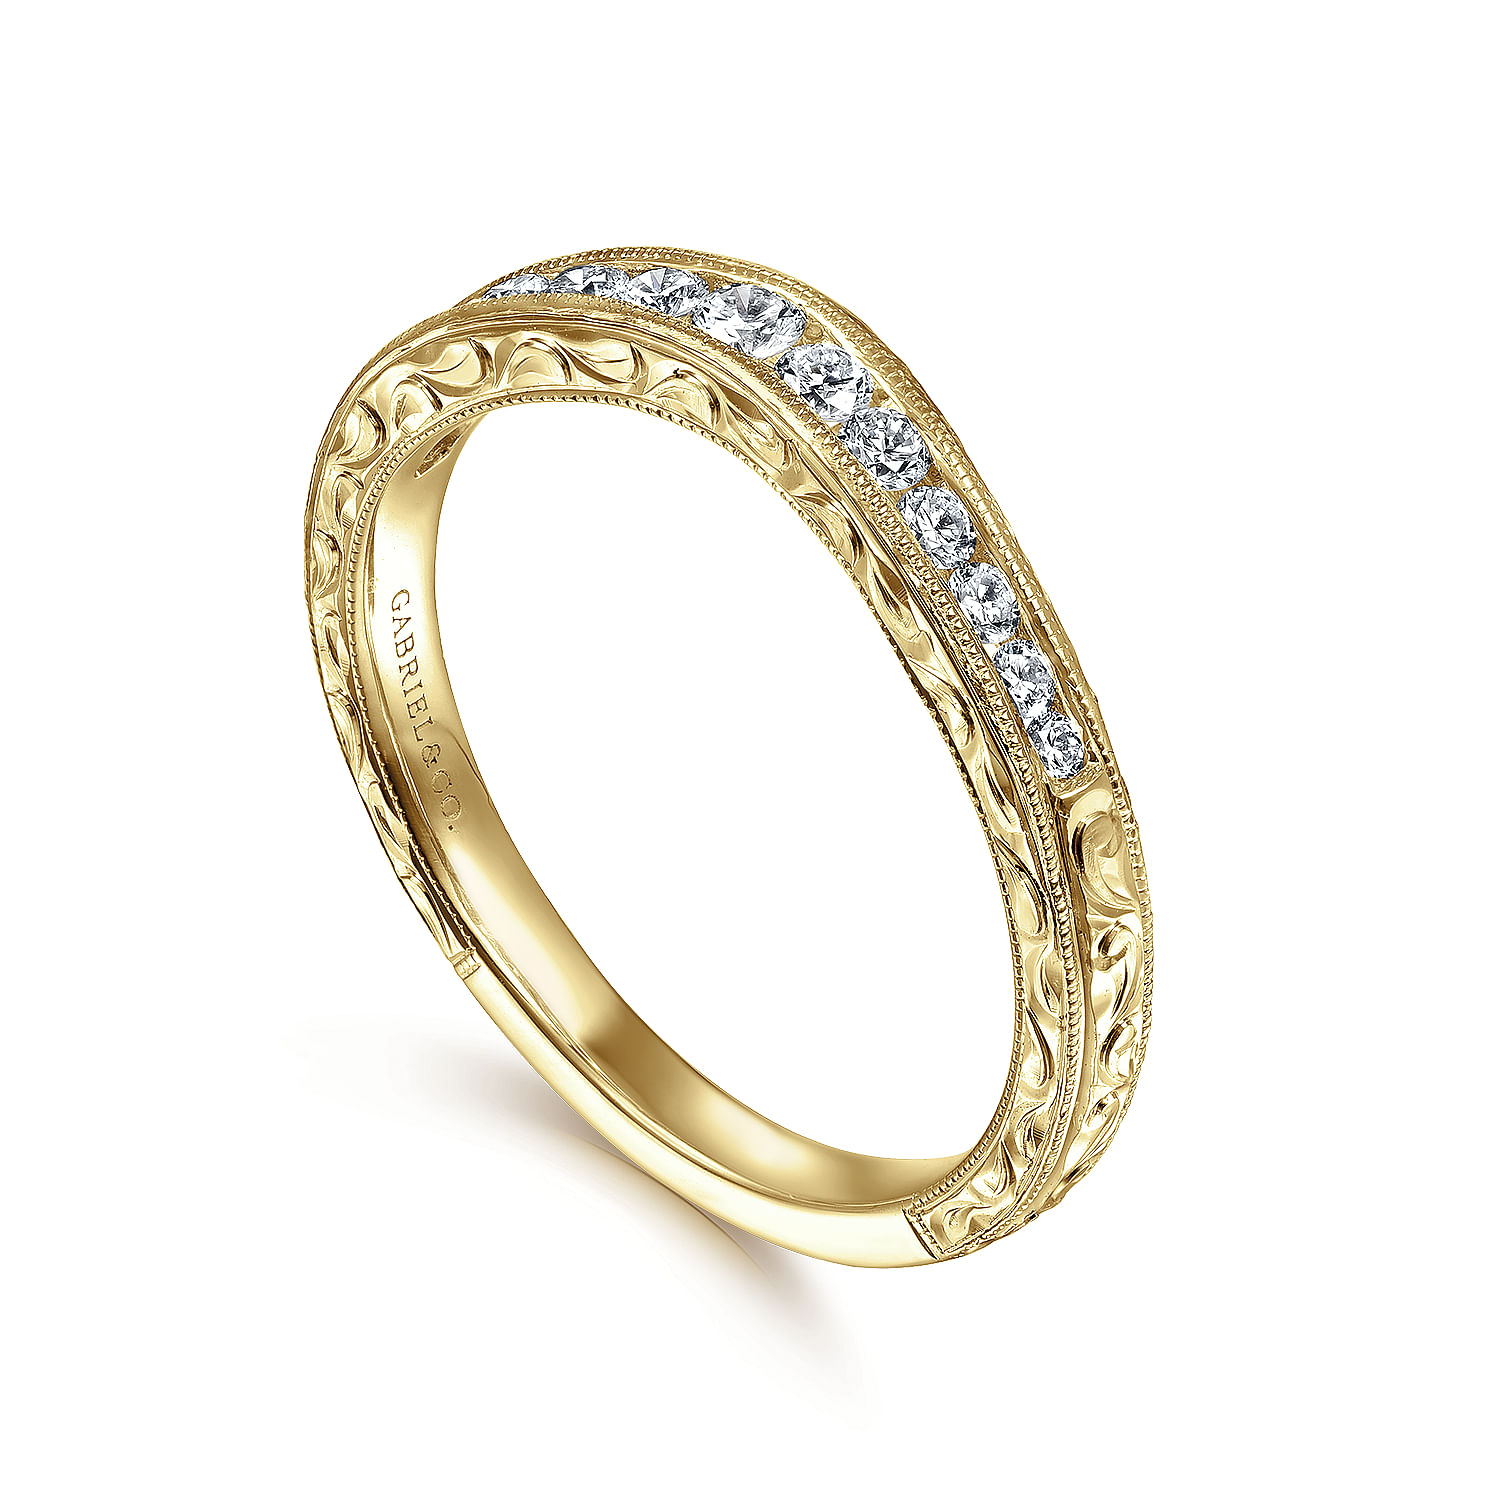 Vintage Inspired 14K Yellow Gold Curved Channel Set Diamond Wedding Band with Engraving